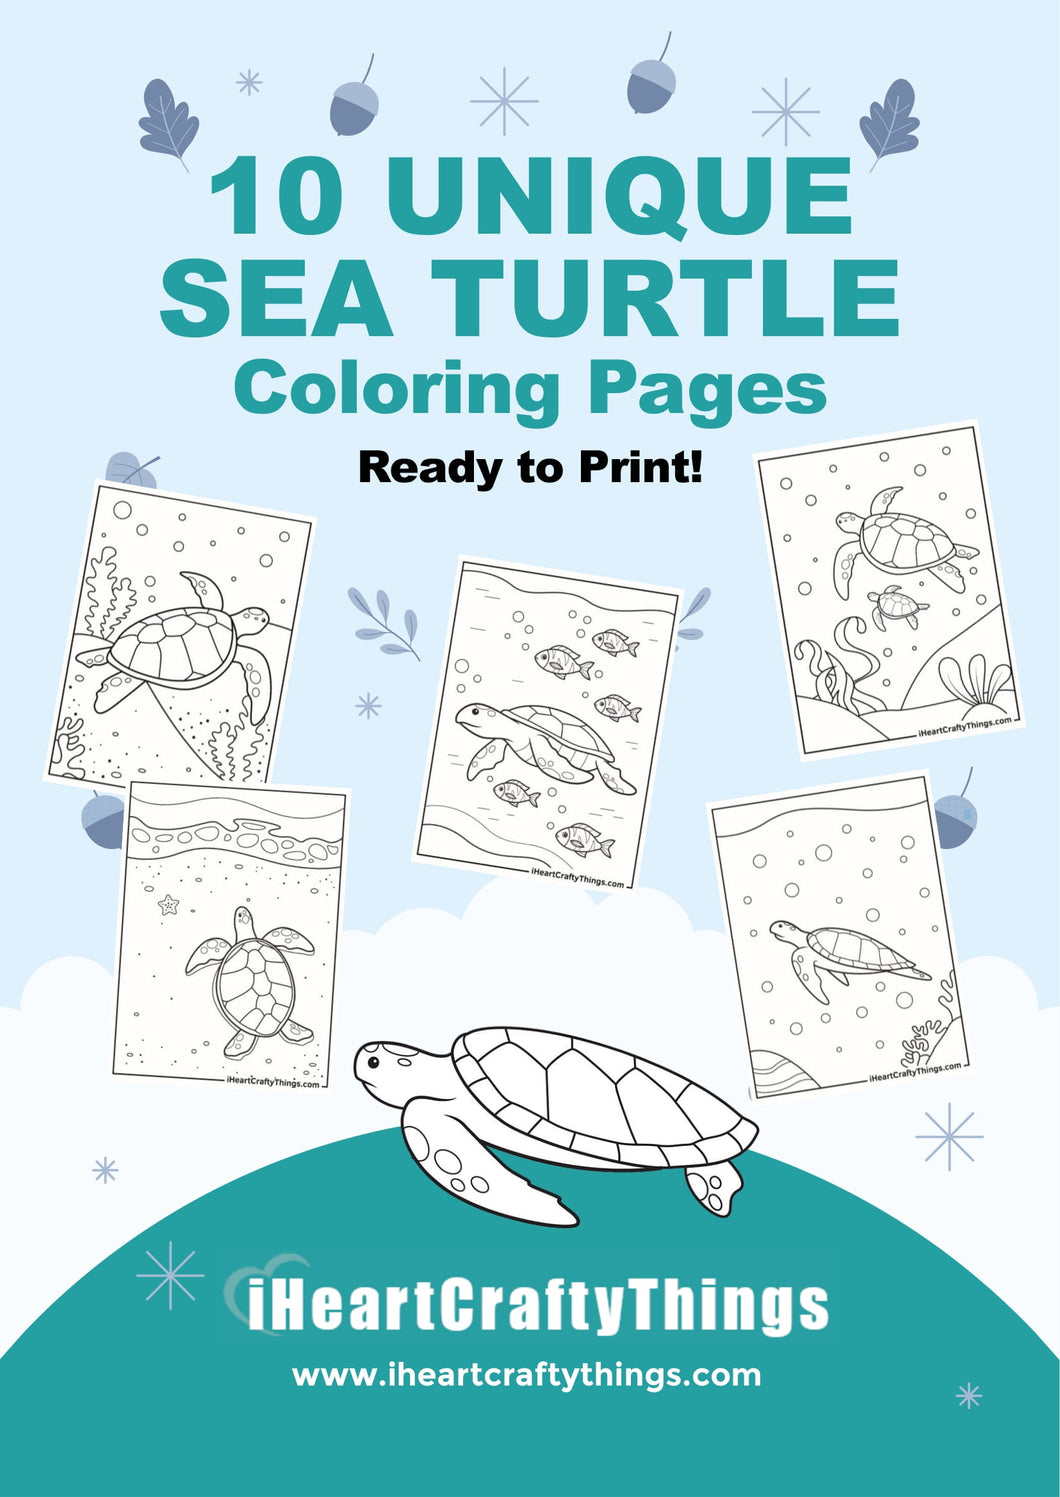 10 SEA TURTLE COLORING PAGES